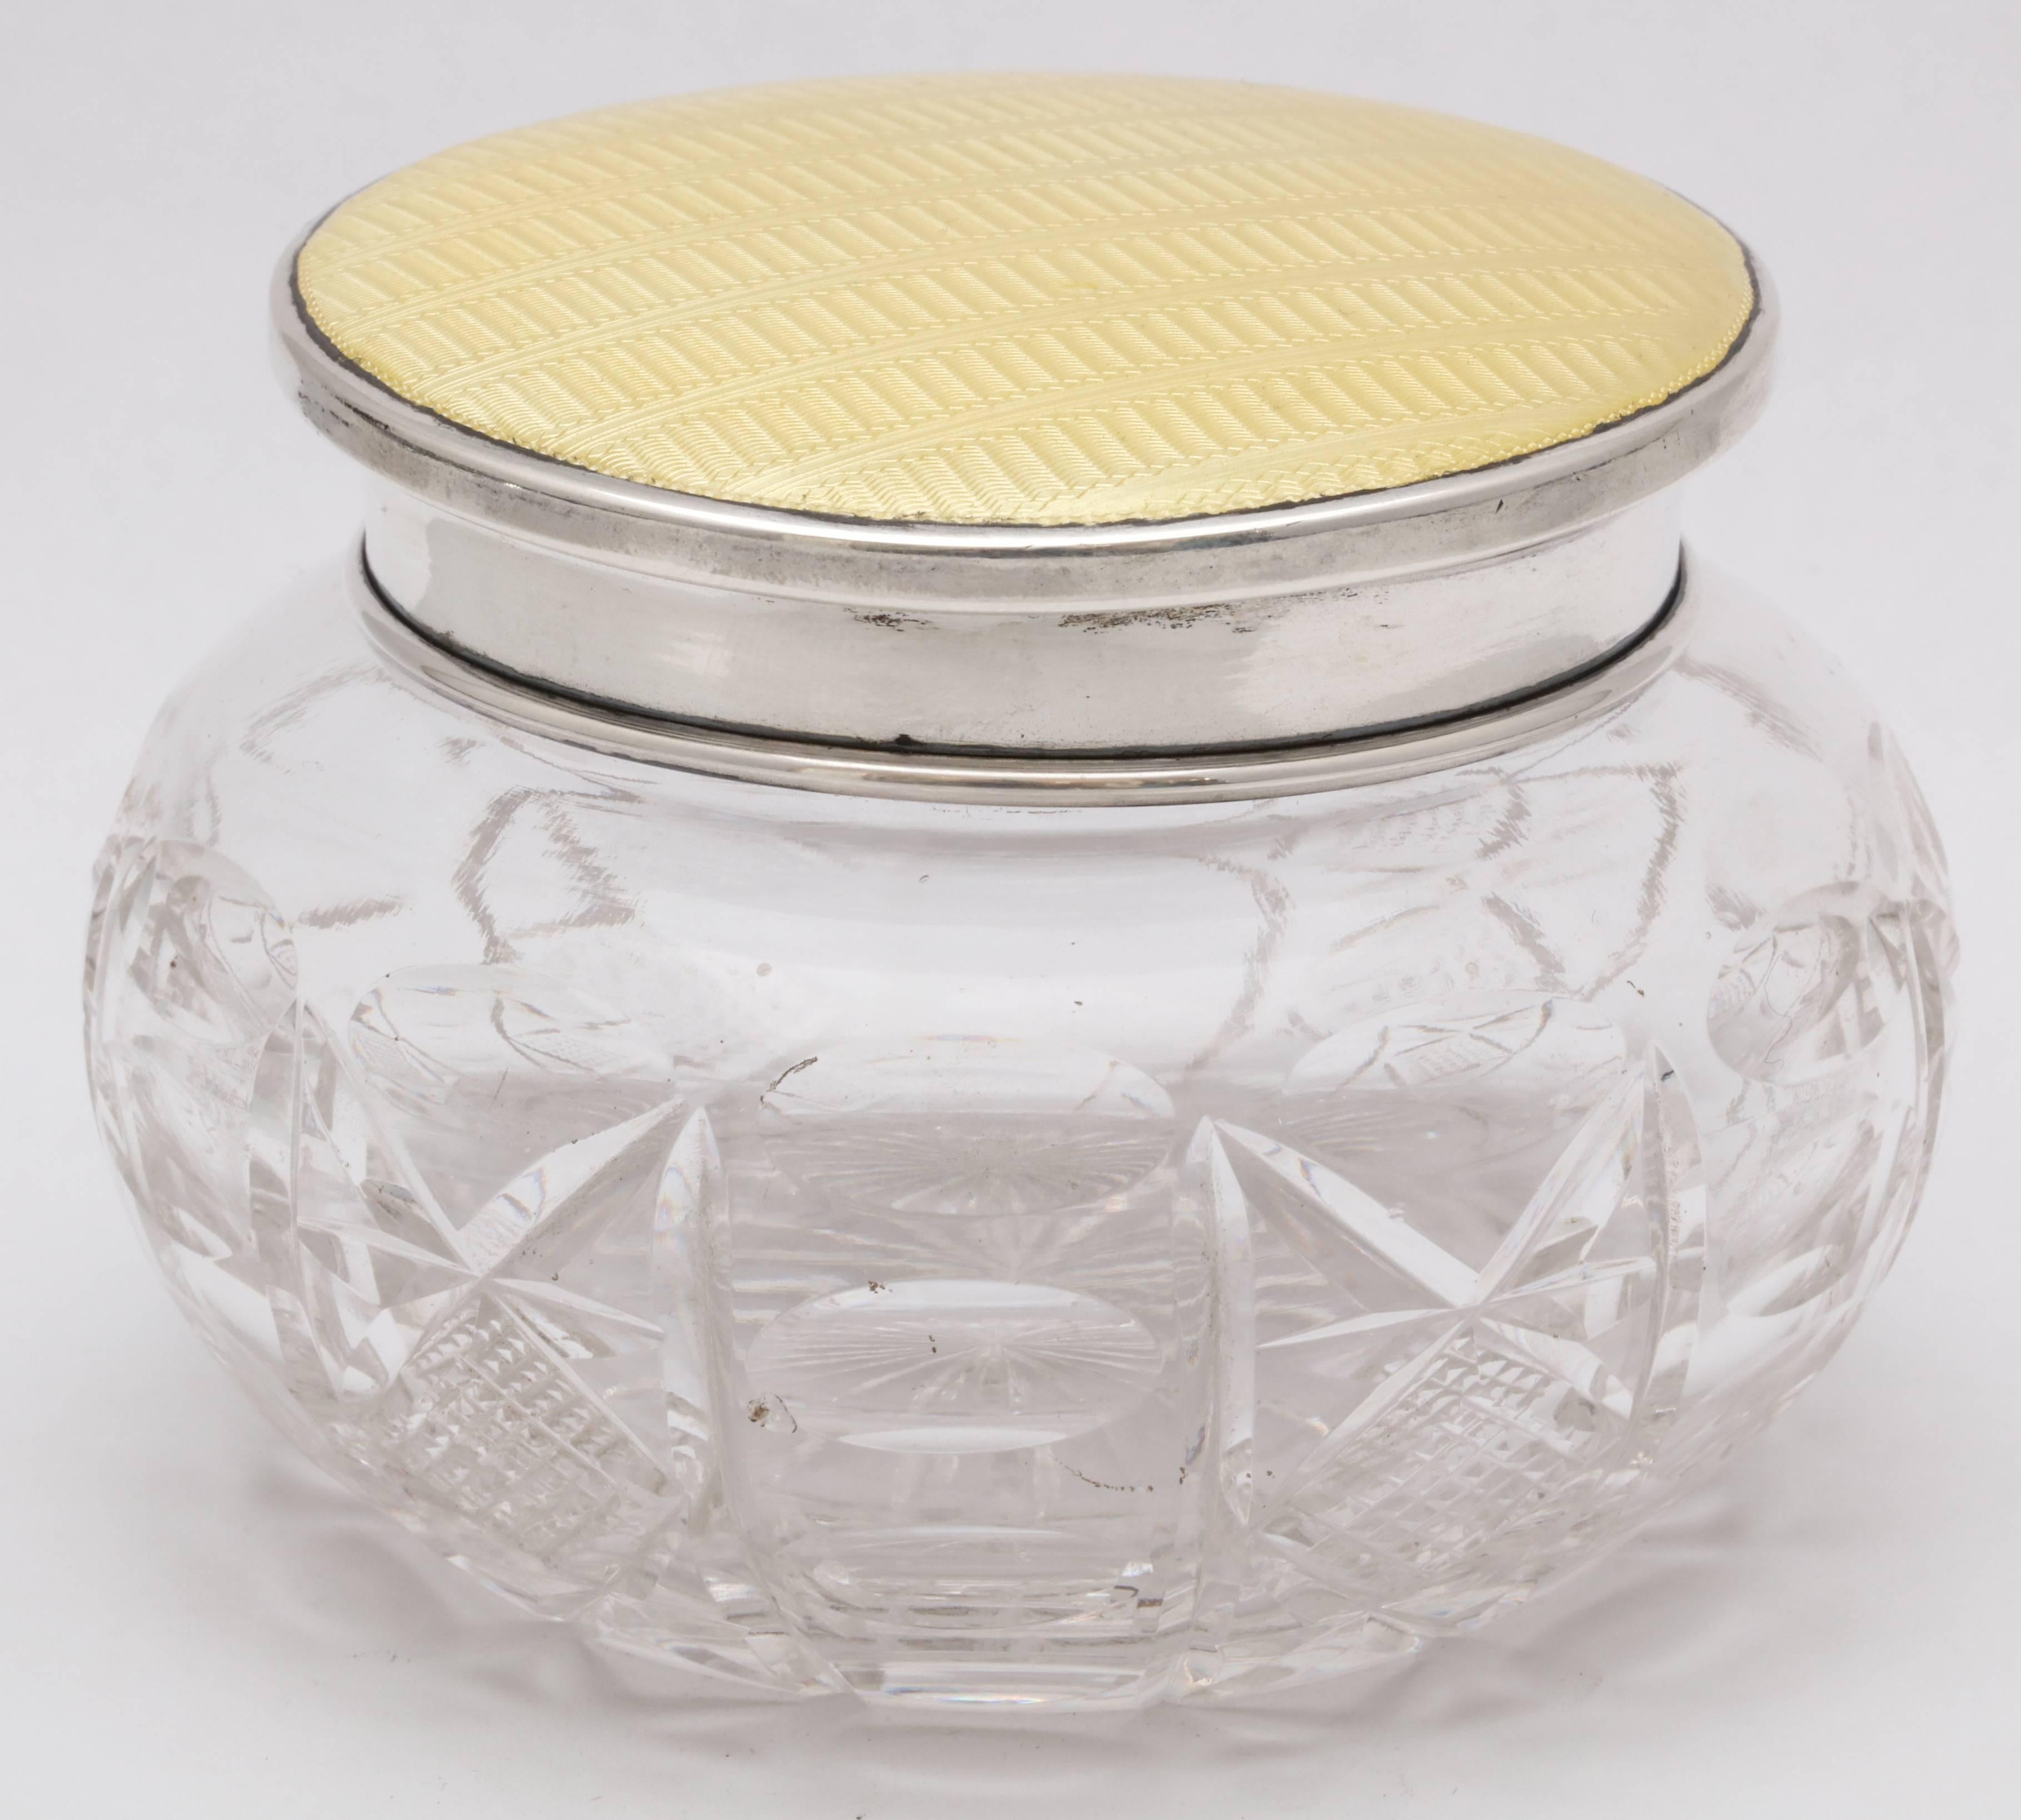 Beautiful, Art Deco, sterling silver and yellow guilloche enamel-mounted cut crystal powder jar, Birmingham, England, 1929, Adie Bros. - makers. The yellow guilloche enamel that decorates the lid is designed to look like ribboned fabric. Crystal is